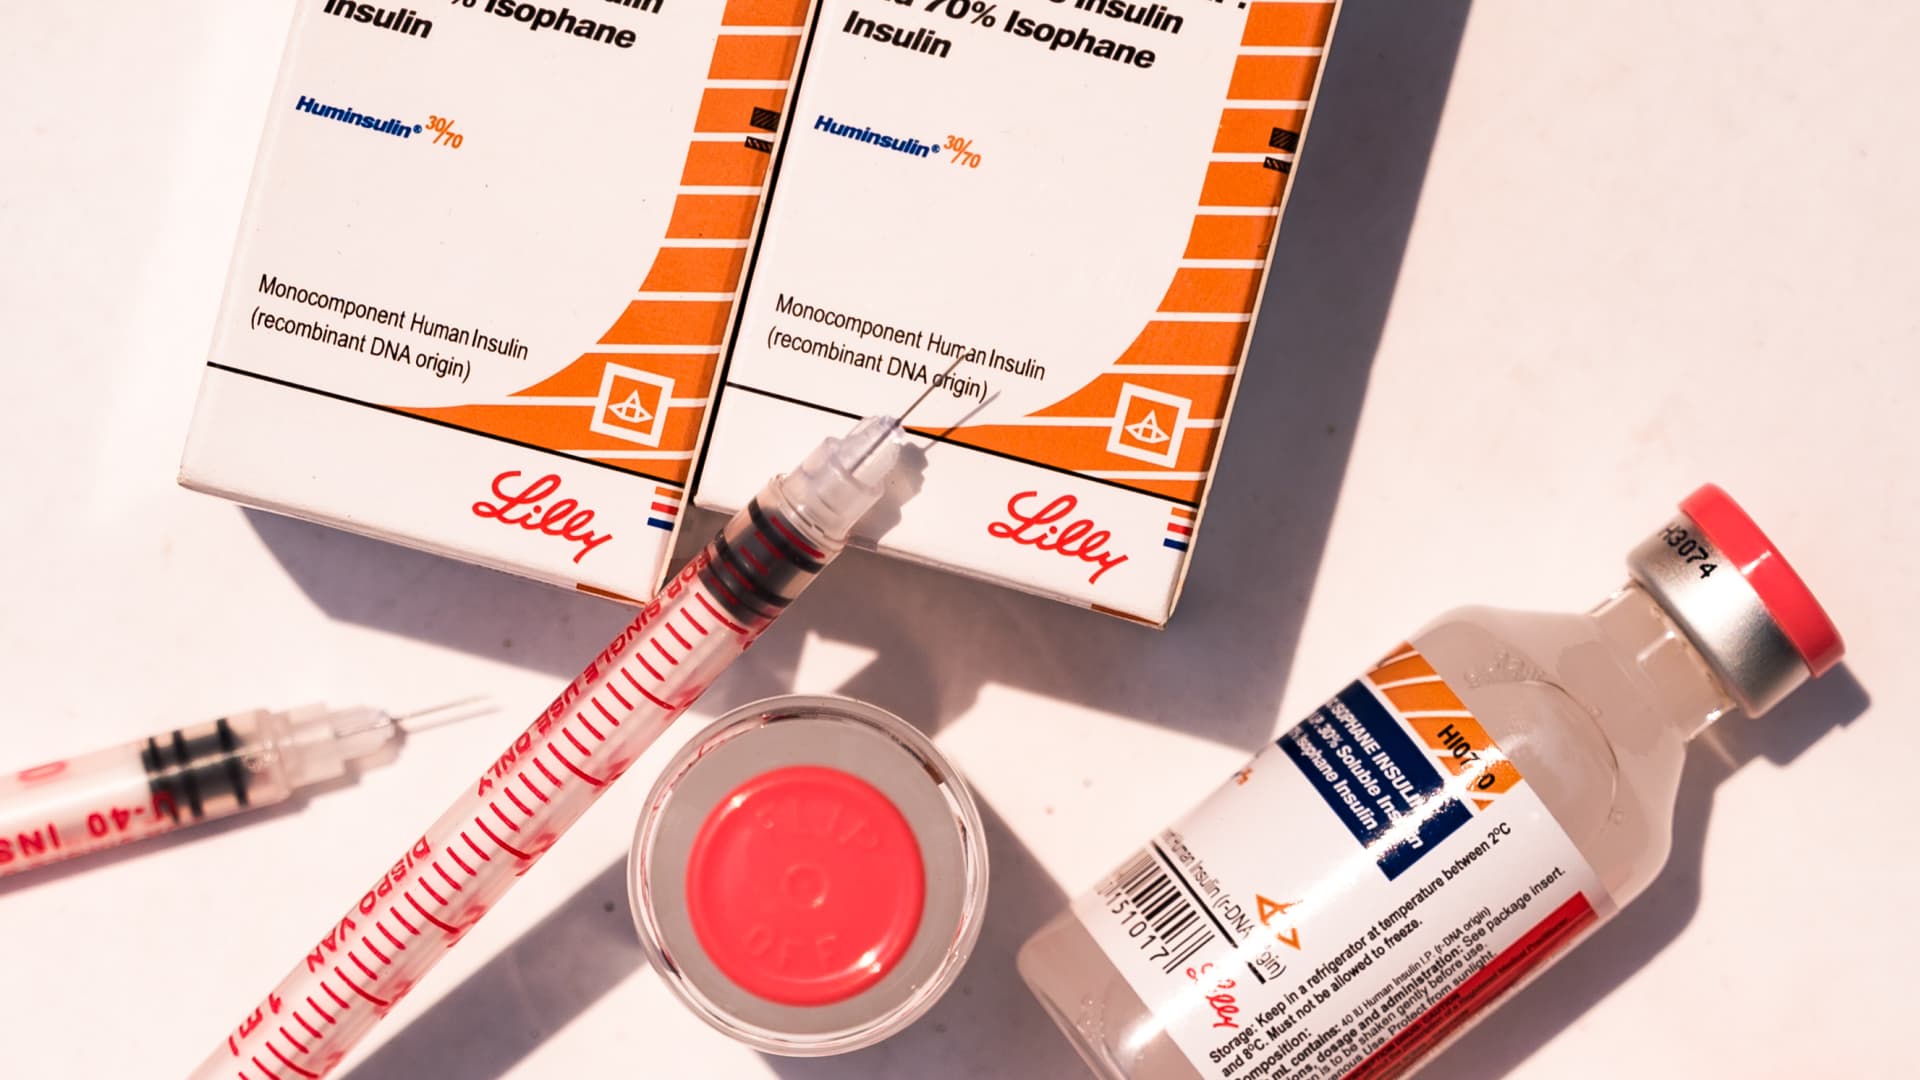 Eli Lilly and more: Strategist names 5 stocks set for ‘significant’ earnings growth